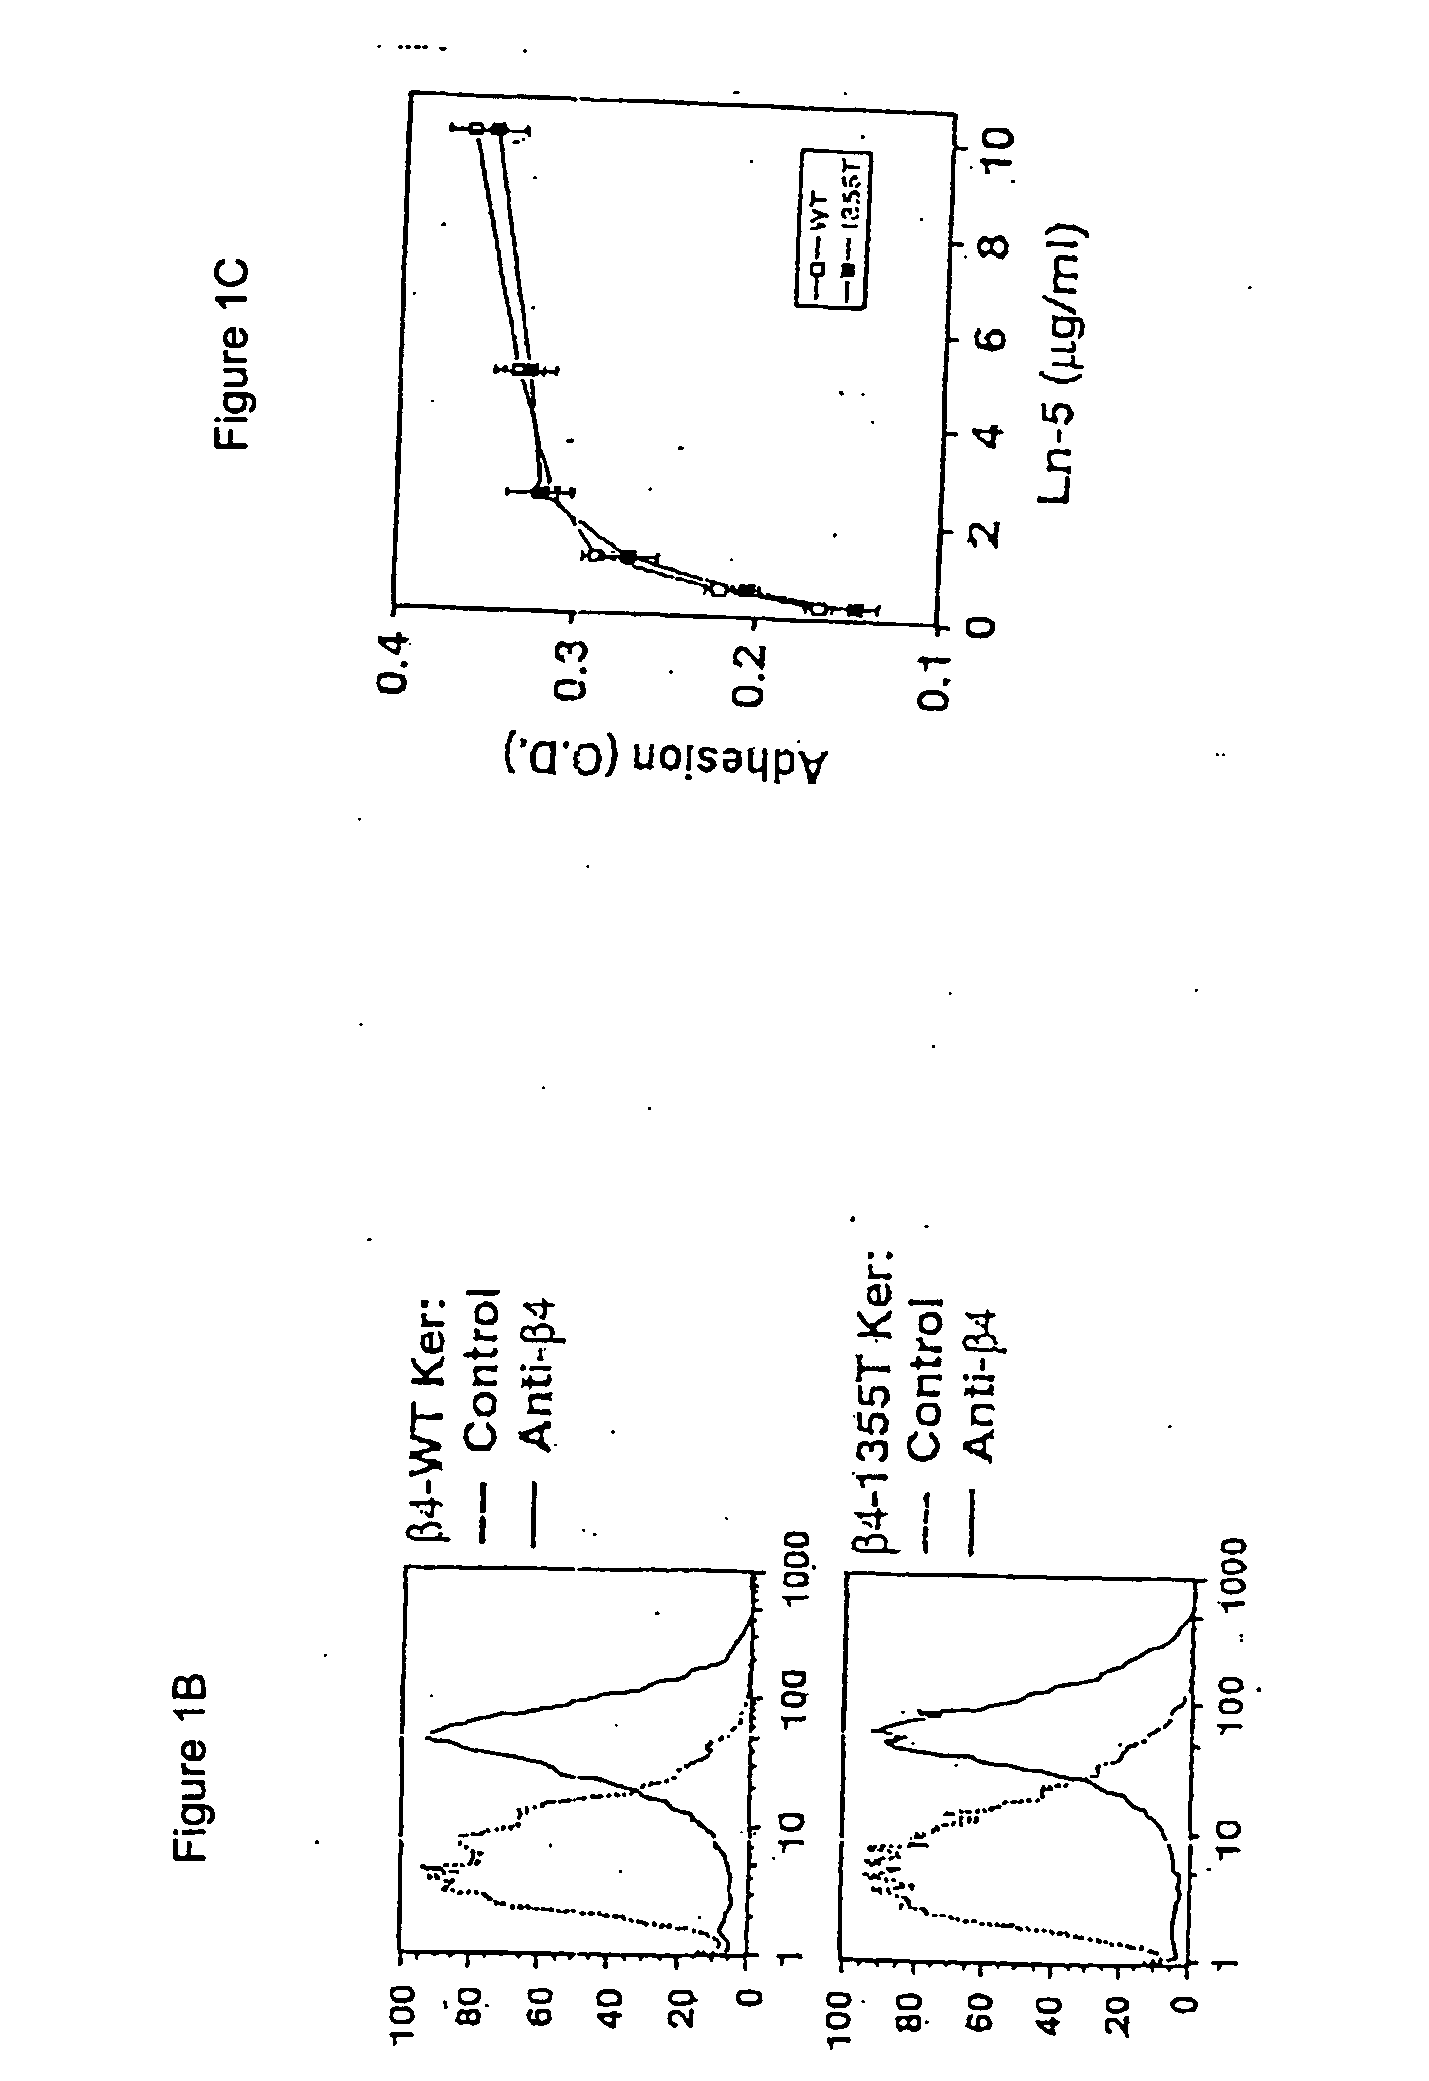 Methods for controlling pathological angiogenesis by inhibition of a6b4 integrin